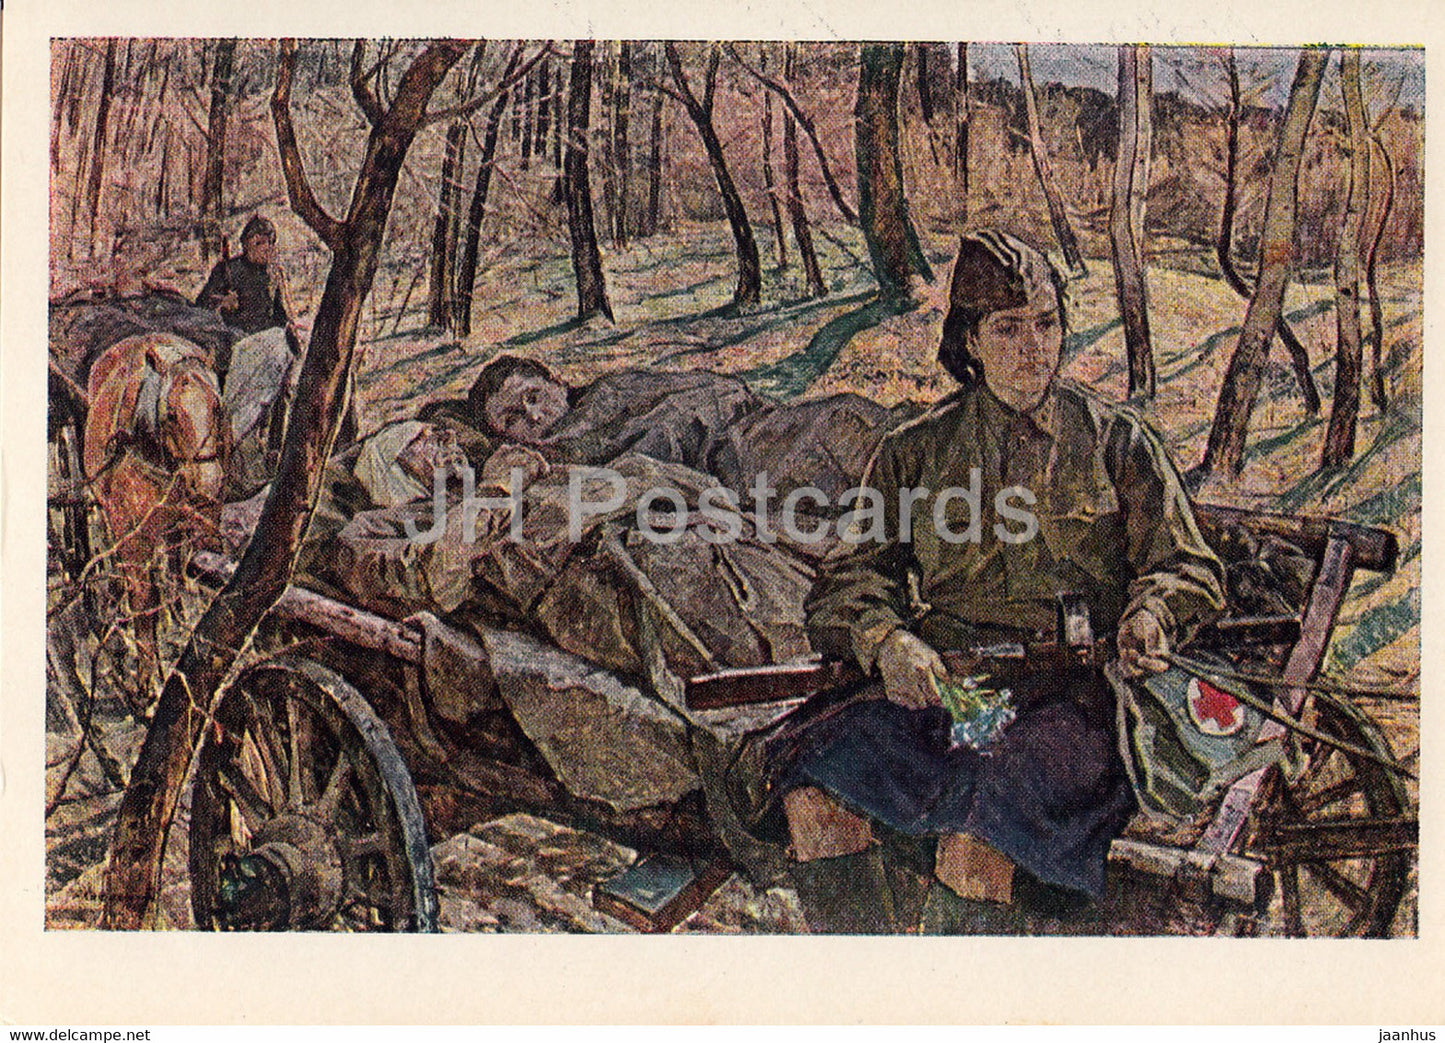 Guarding the World - painting by A. Safargalin - Nurse - horse carriage - military - art - 1965 - Russia USSR - unused - JH Postcards